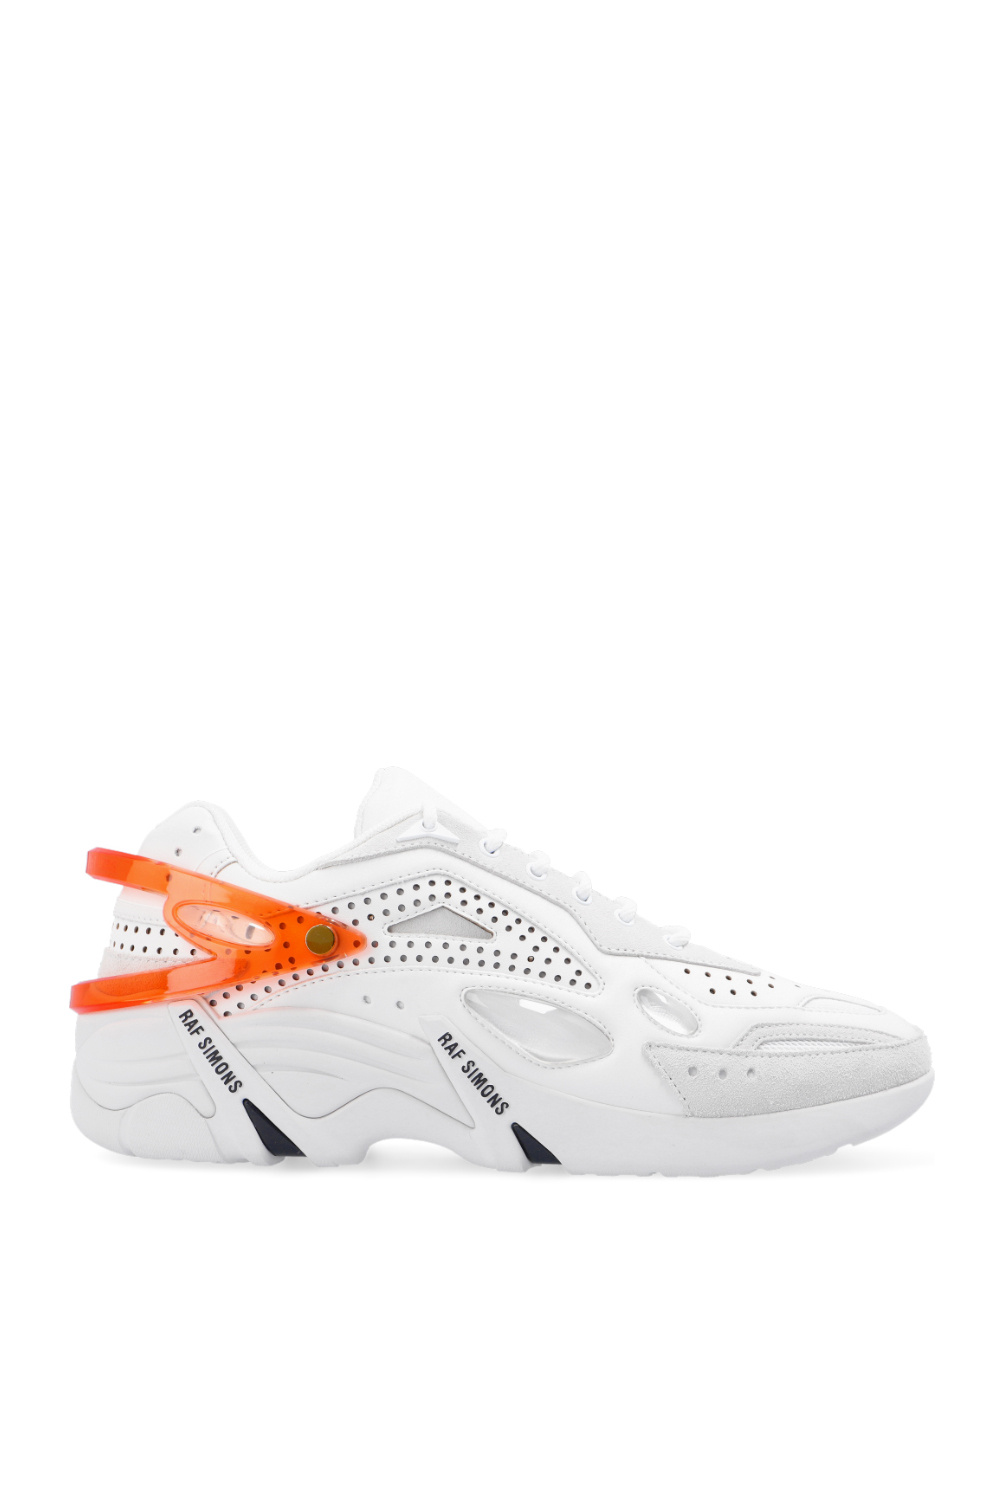 21' sneakers Raf Simons - Best running shoes 2022 tested in the and on the road - White 'Cylon - IetpShops Netherlands